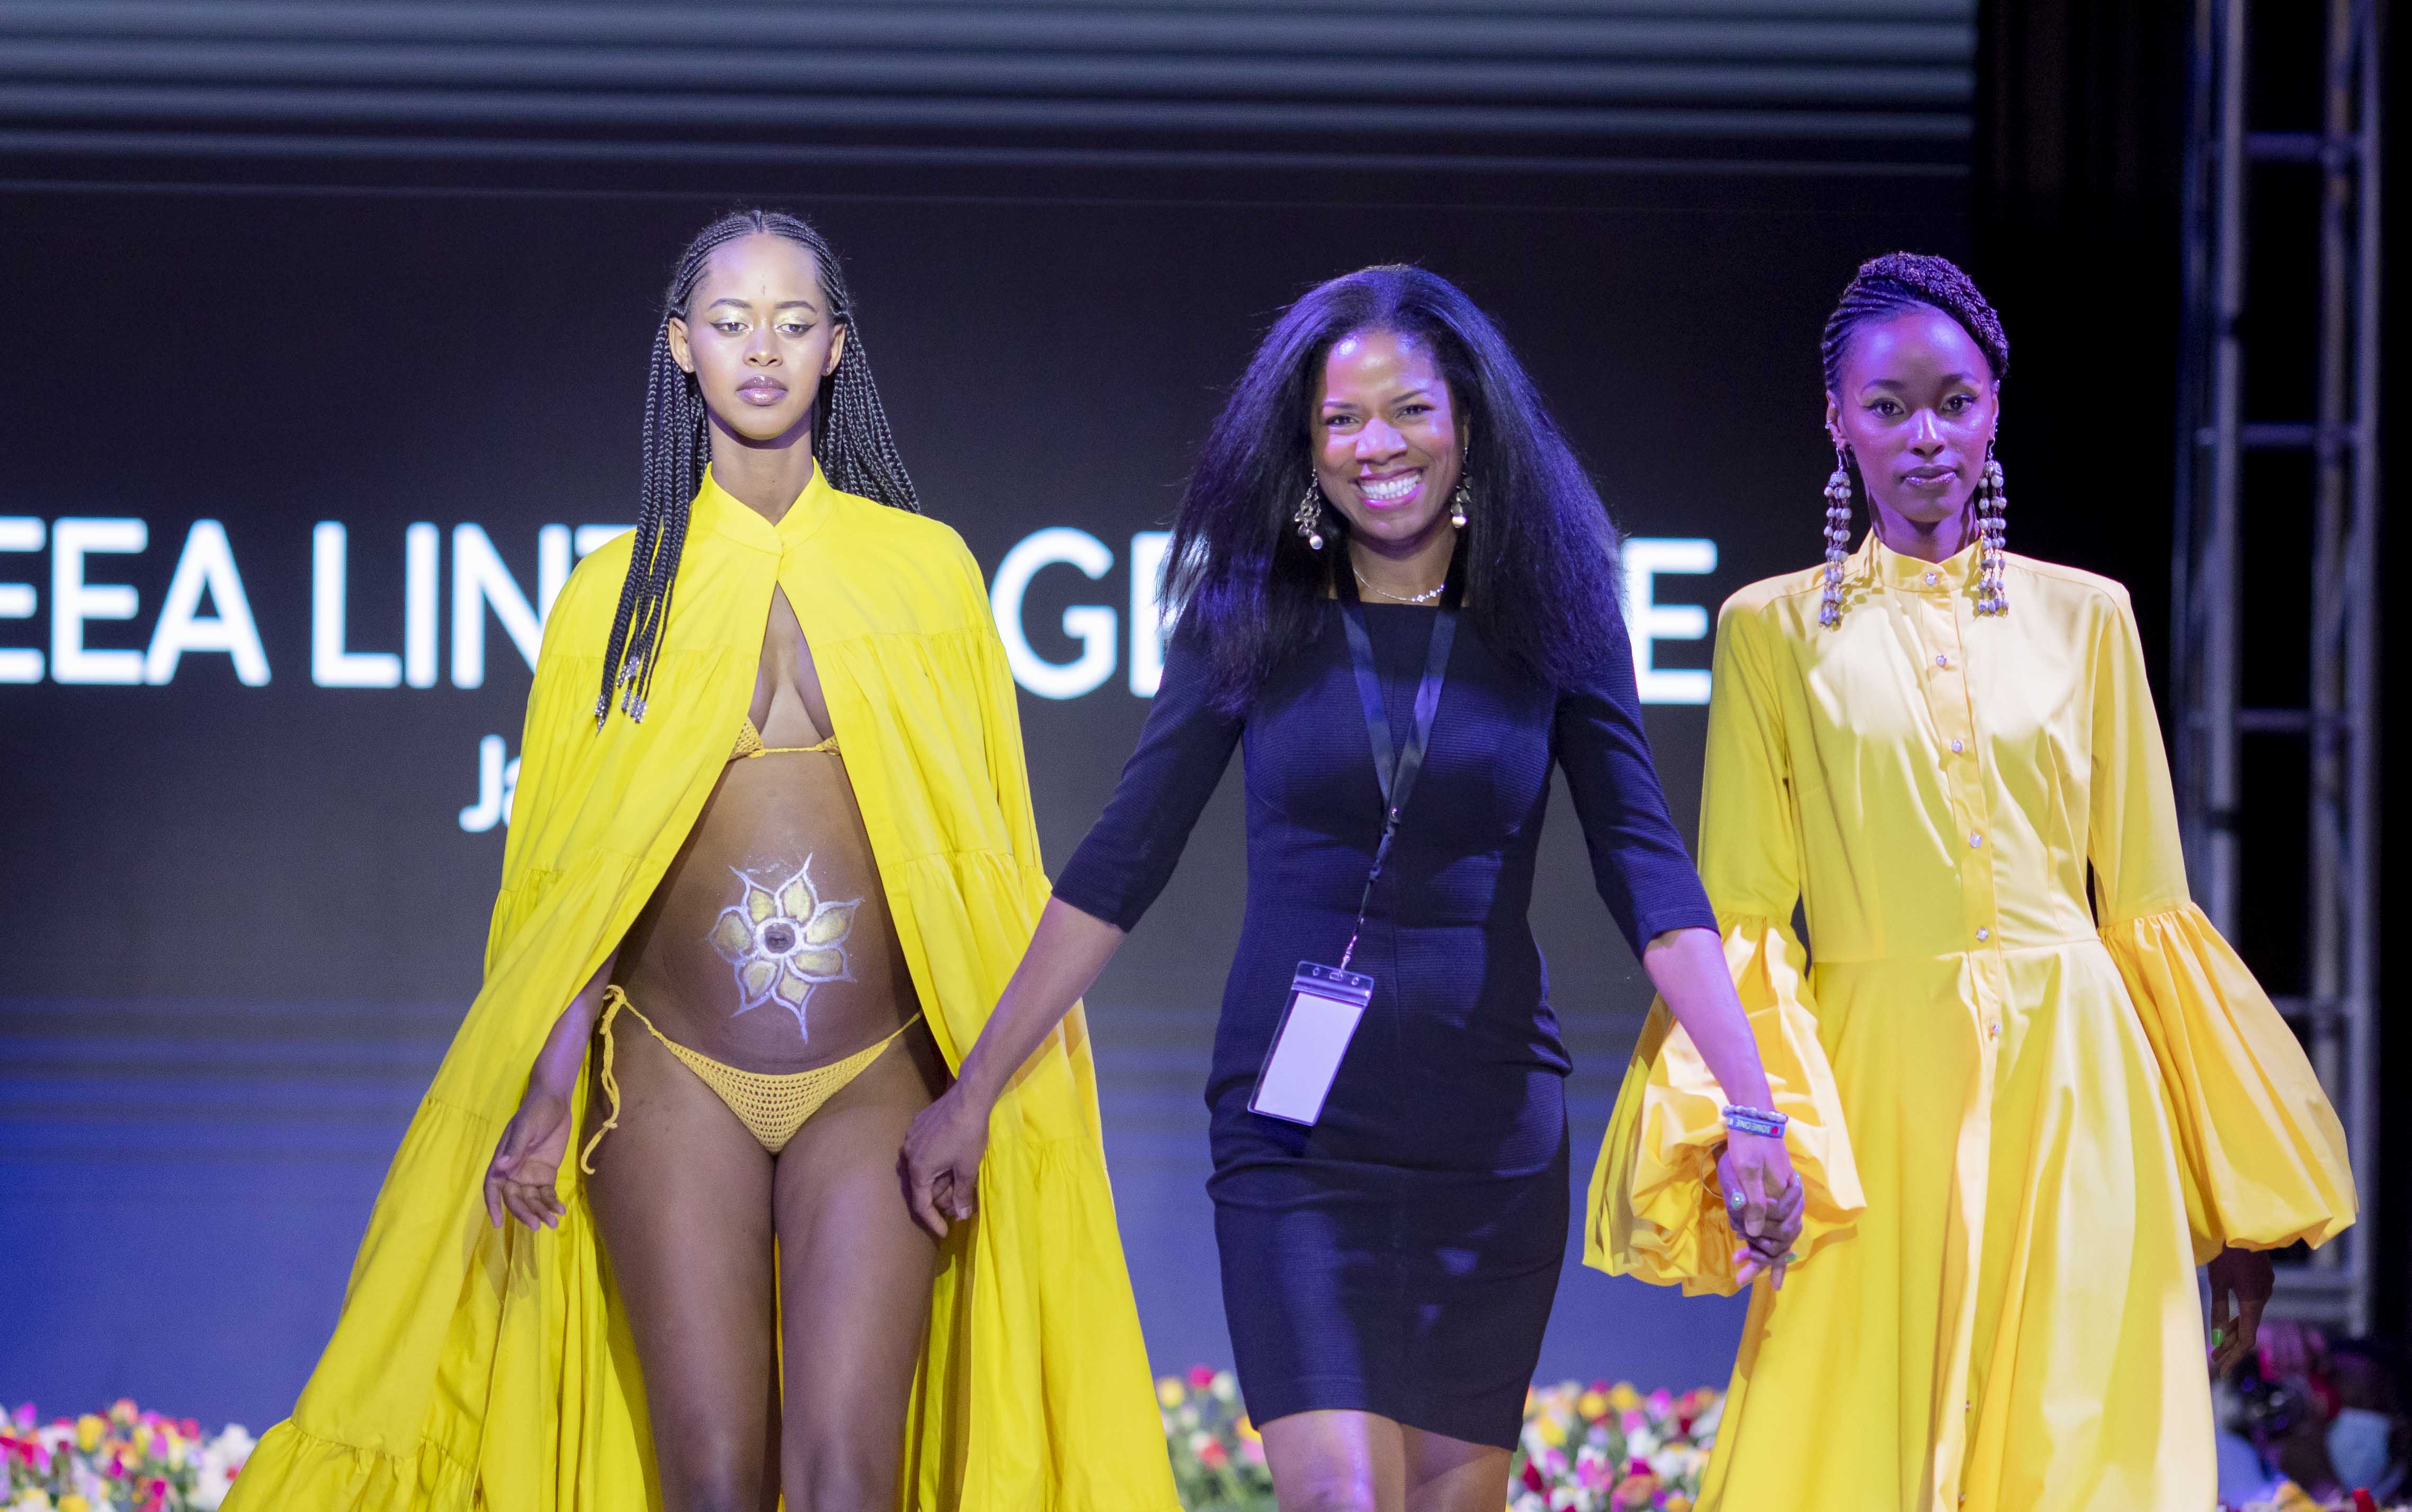 Kaneea Linton, a Jamaican designer with some of her models.